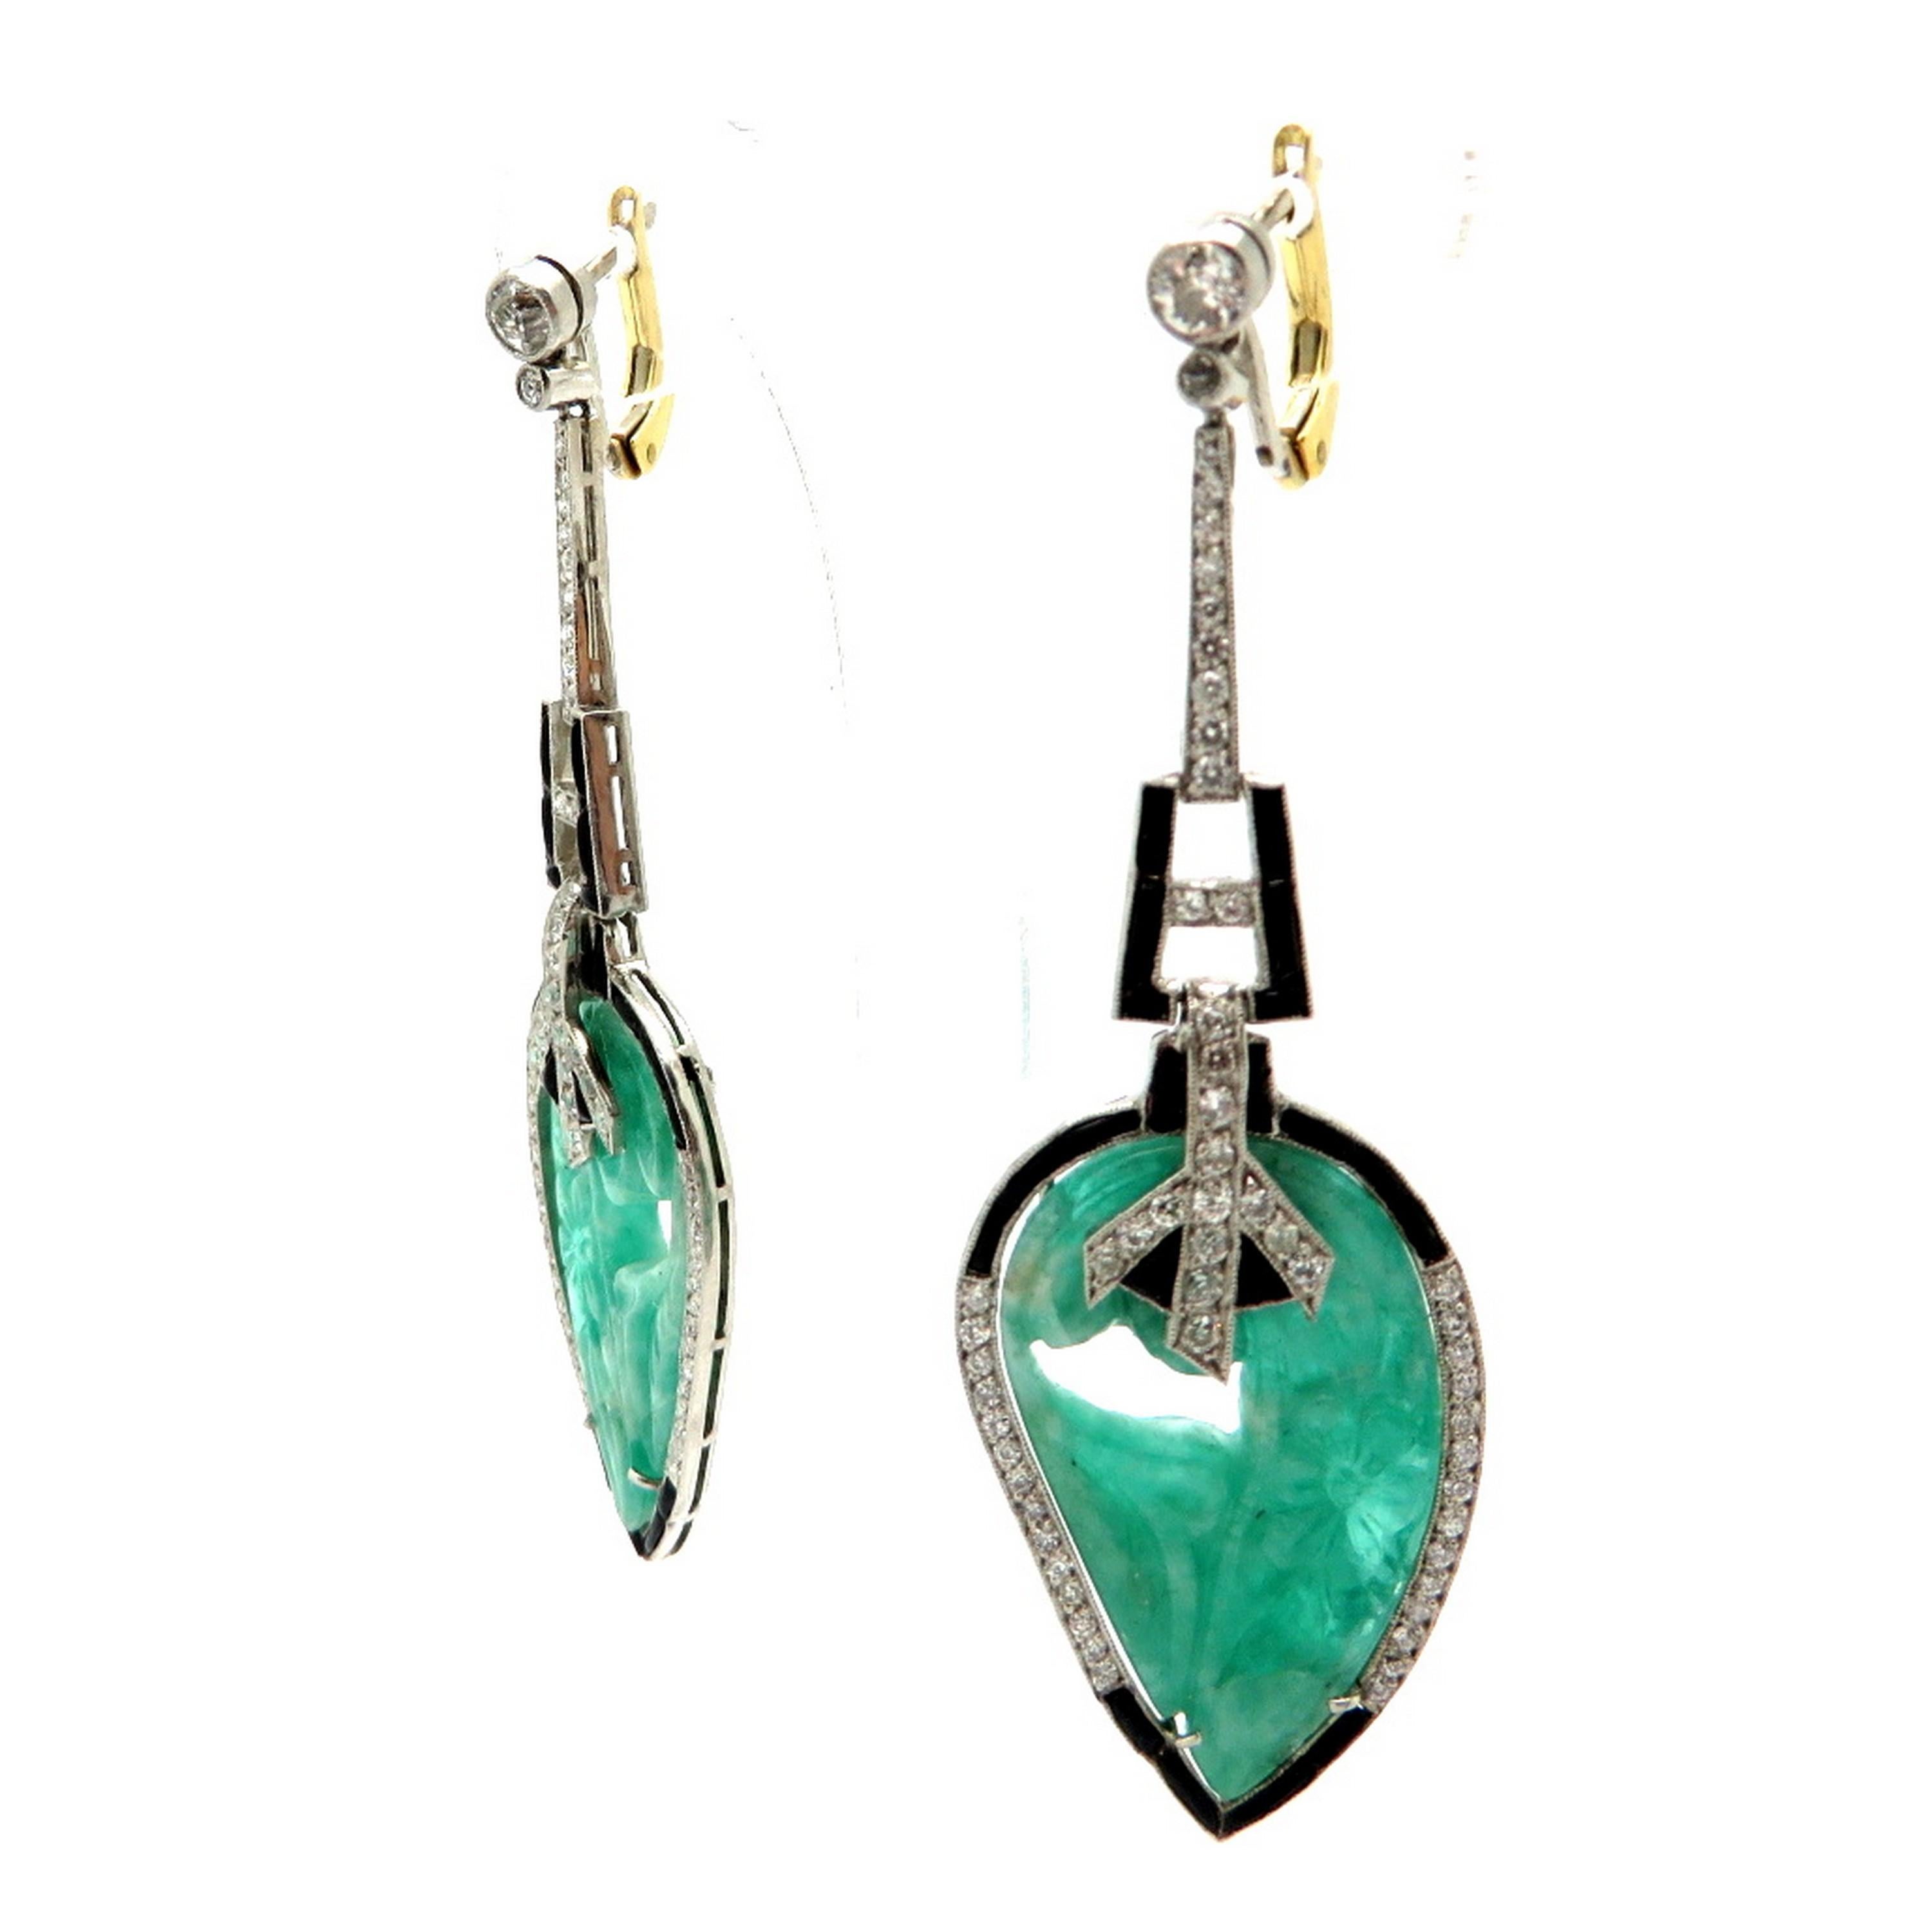 Estate emerald and diamond platinum Art Deco style leaf dangle earrings. Showcasing 2 fine quality carved emeralds with a leaf motif. Accented with 110 Old European cut bead and bezel set diamonds, weighing a combined total of approximately 1.55